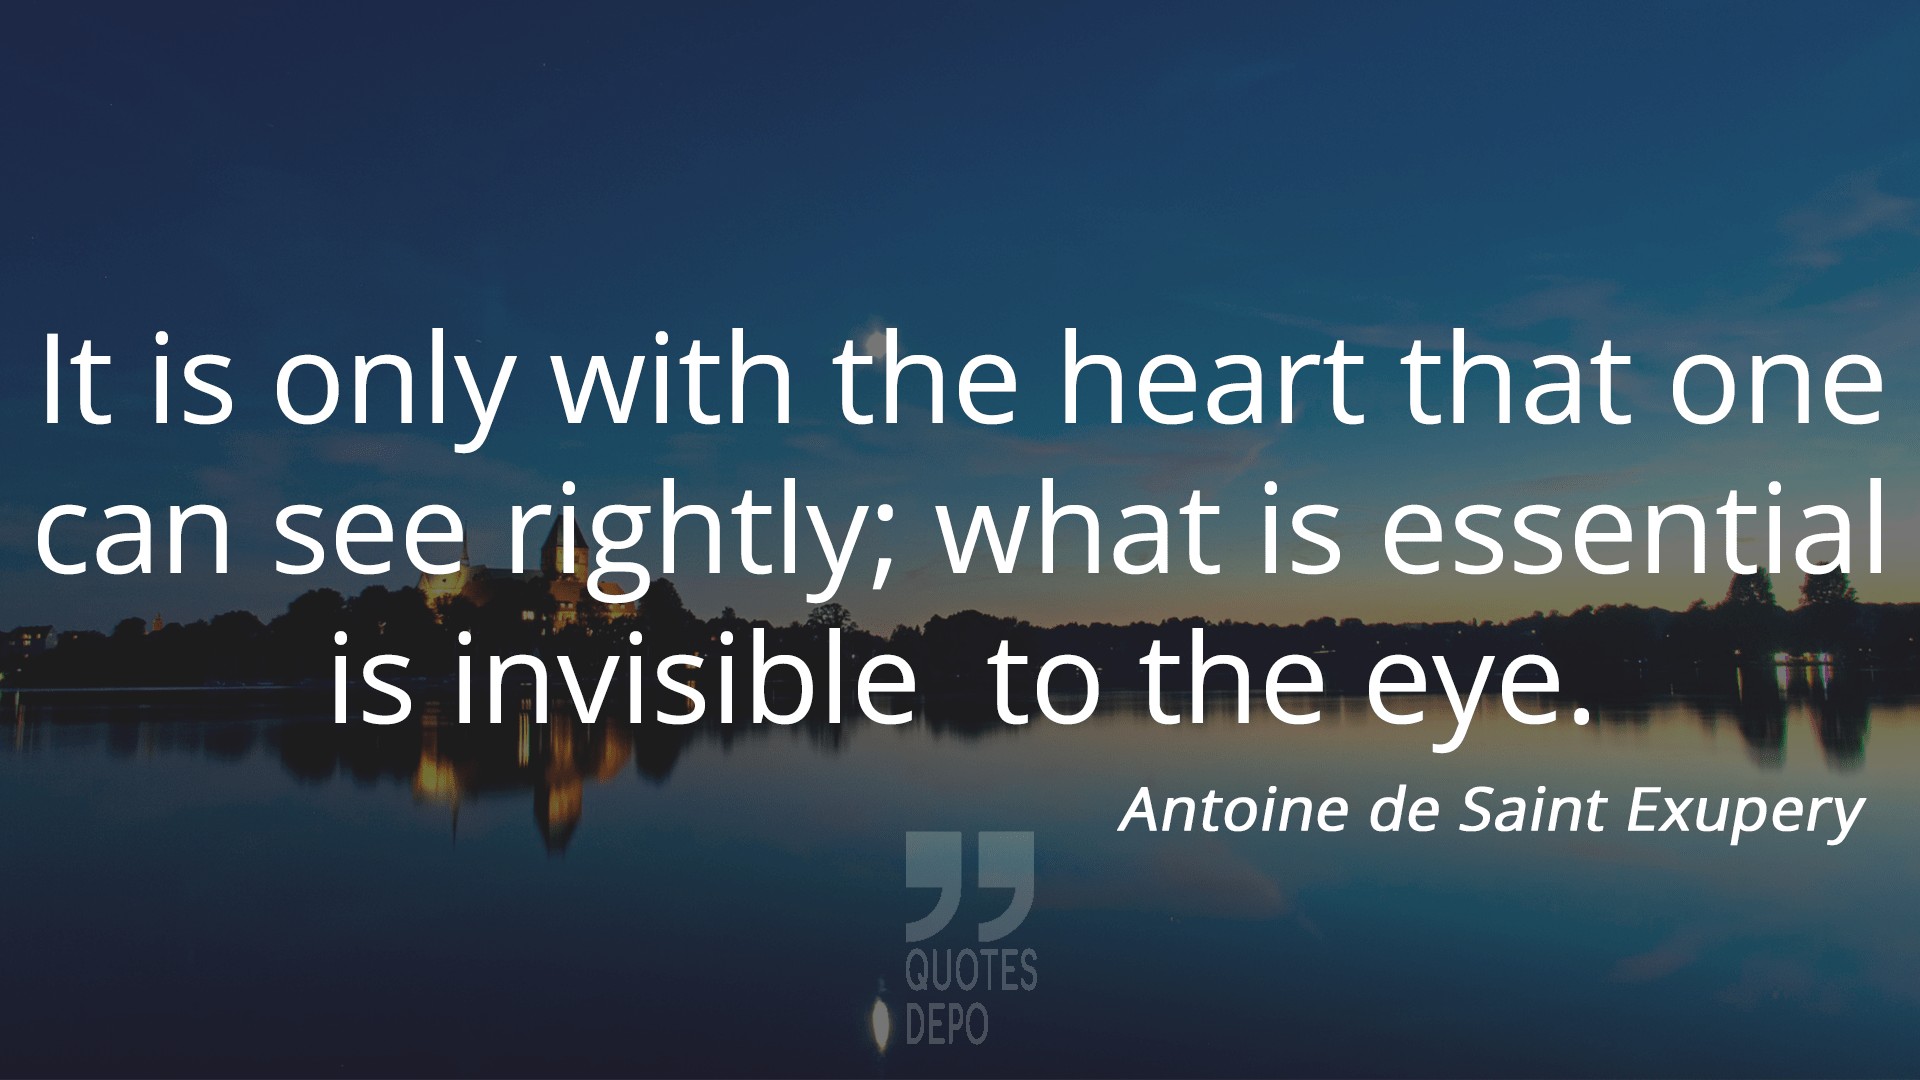 it is only with the heart that one can see rightly - antoine de saint exupery quotes